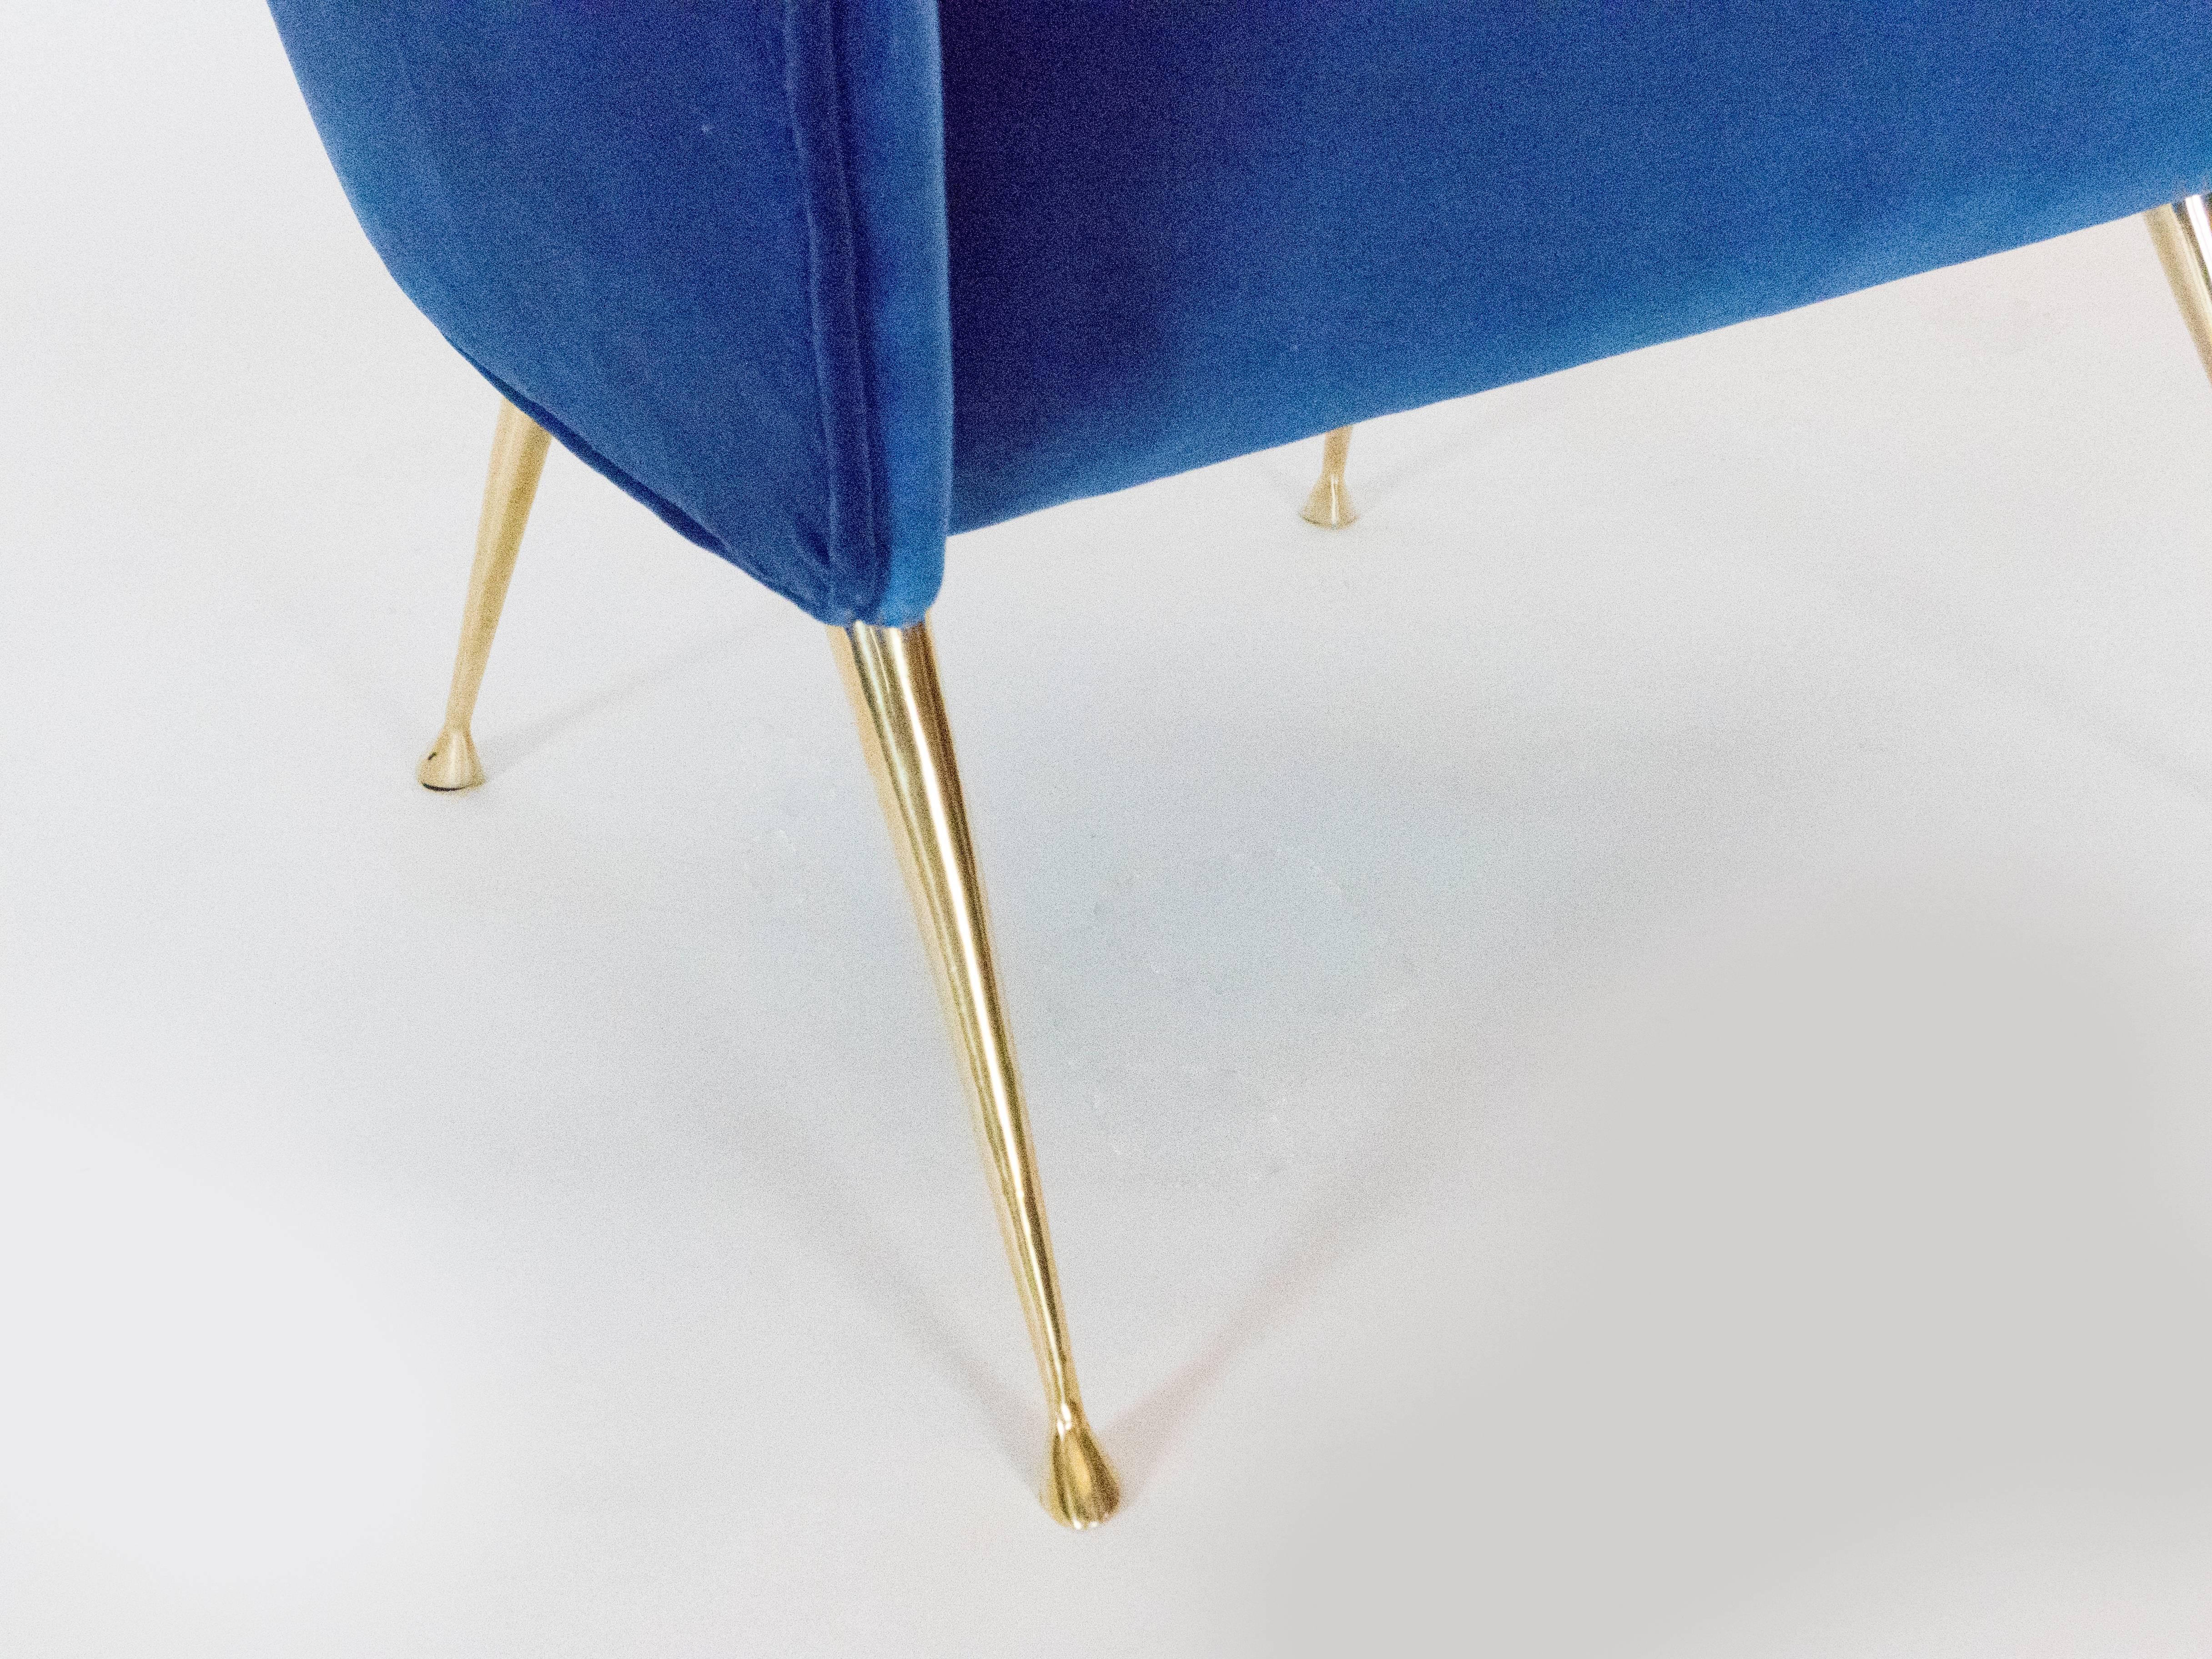 Brass Pair of Briance Chairs by Bourgeois Boheme Atelier